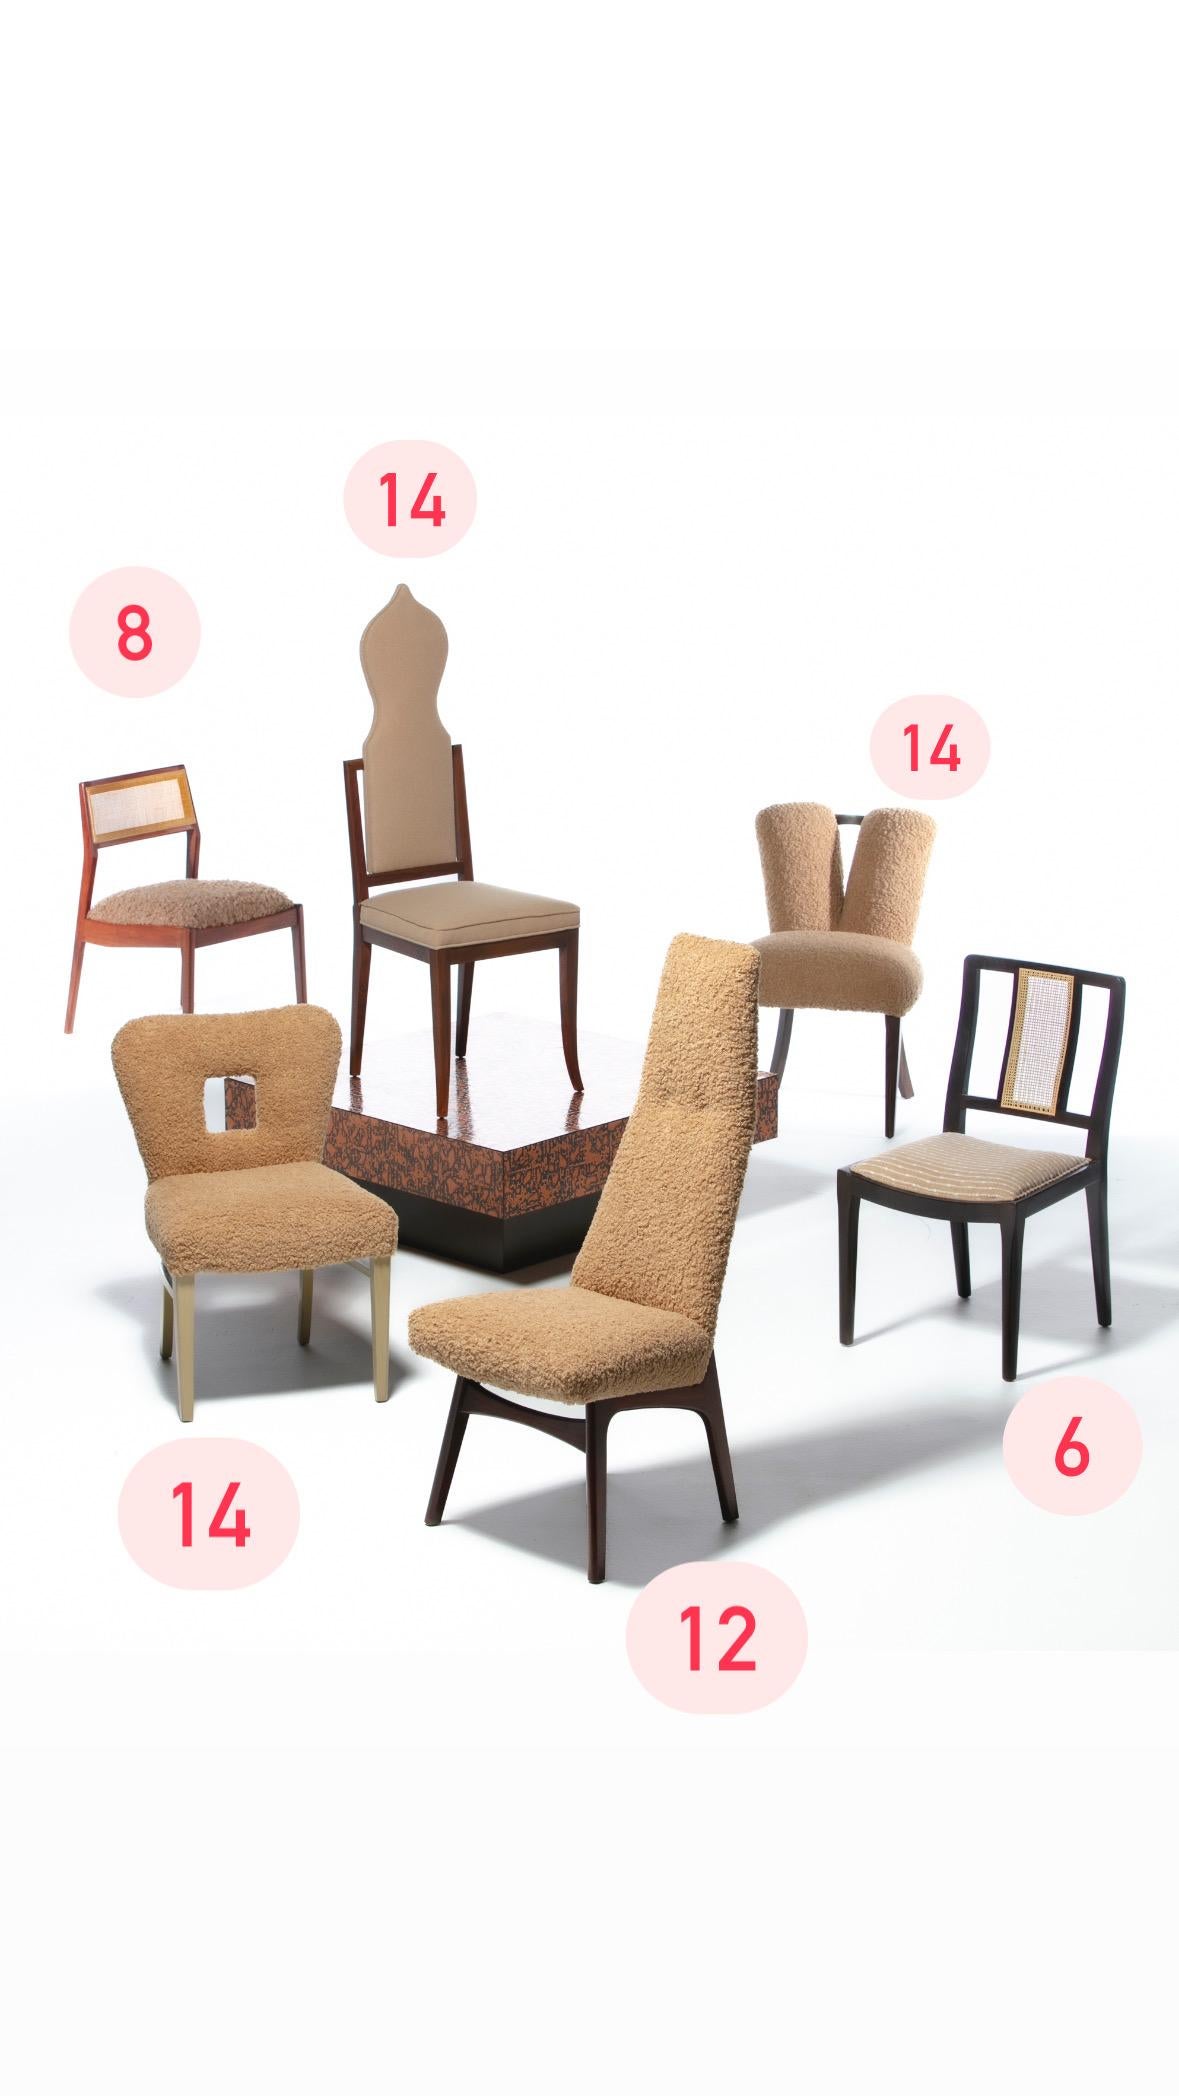 Paul Frankl Set of 14 Dining Chairs in Bleached Mahogany & Latte Bouclé c. 1950 For Sale 14